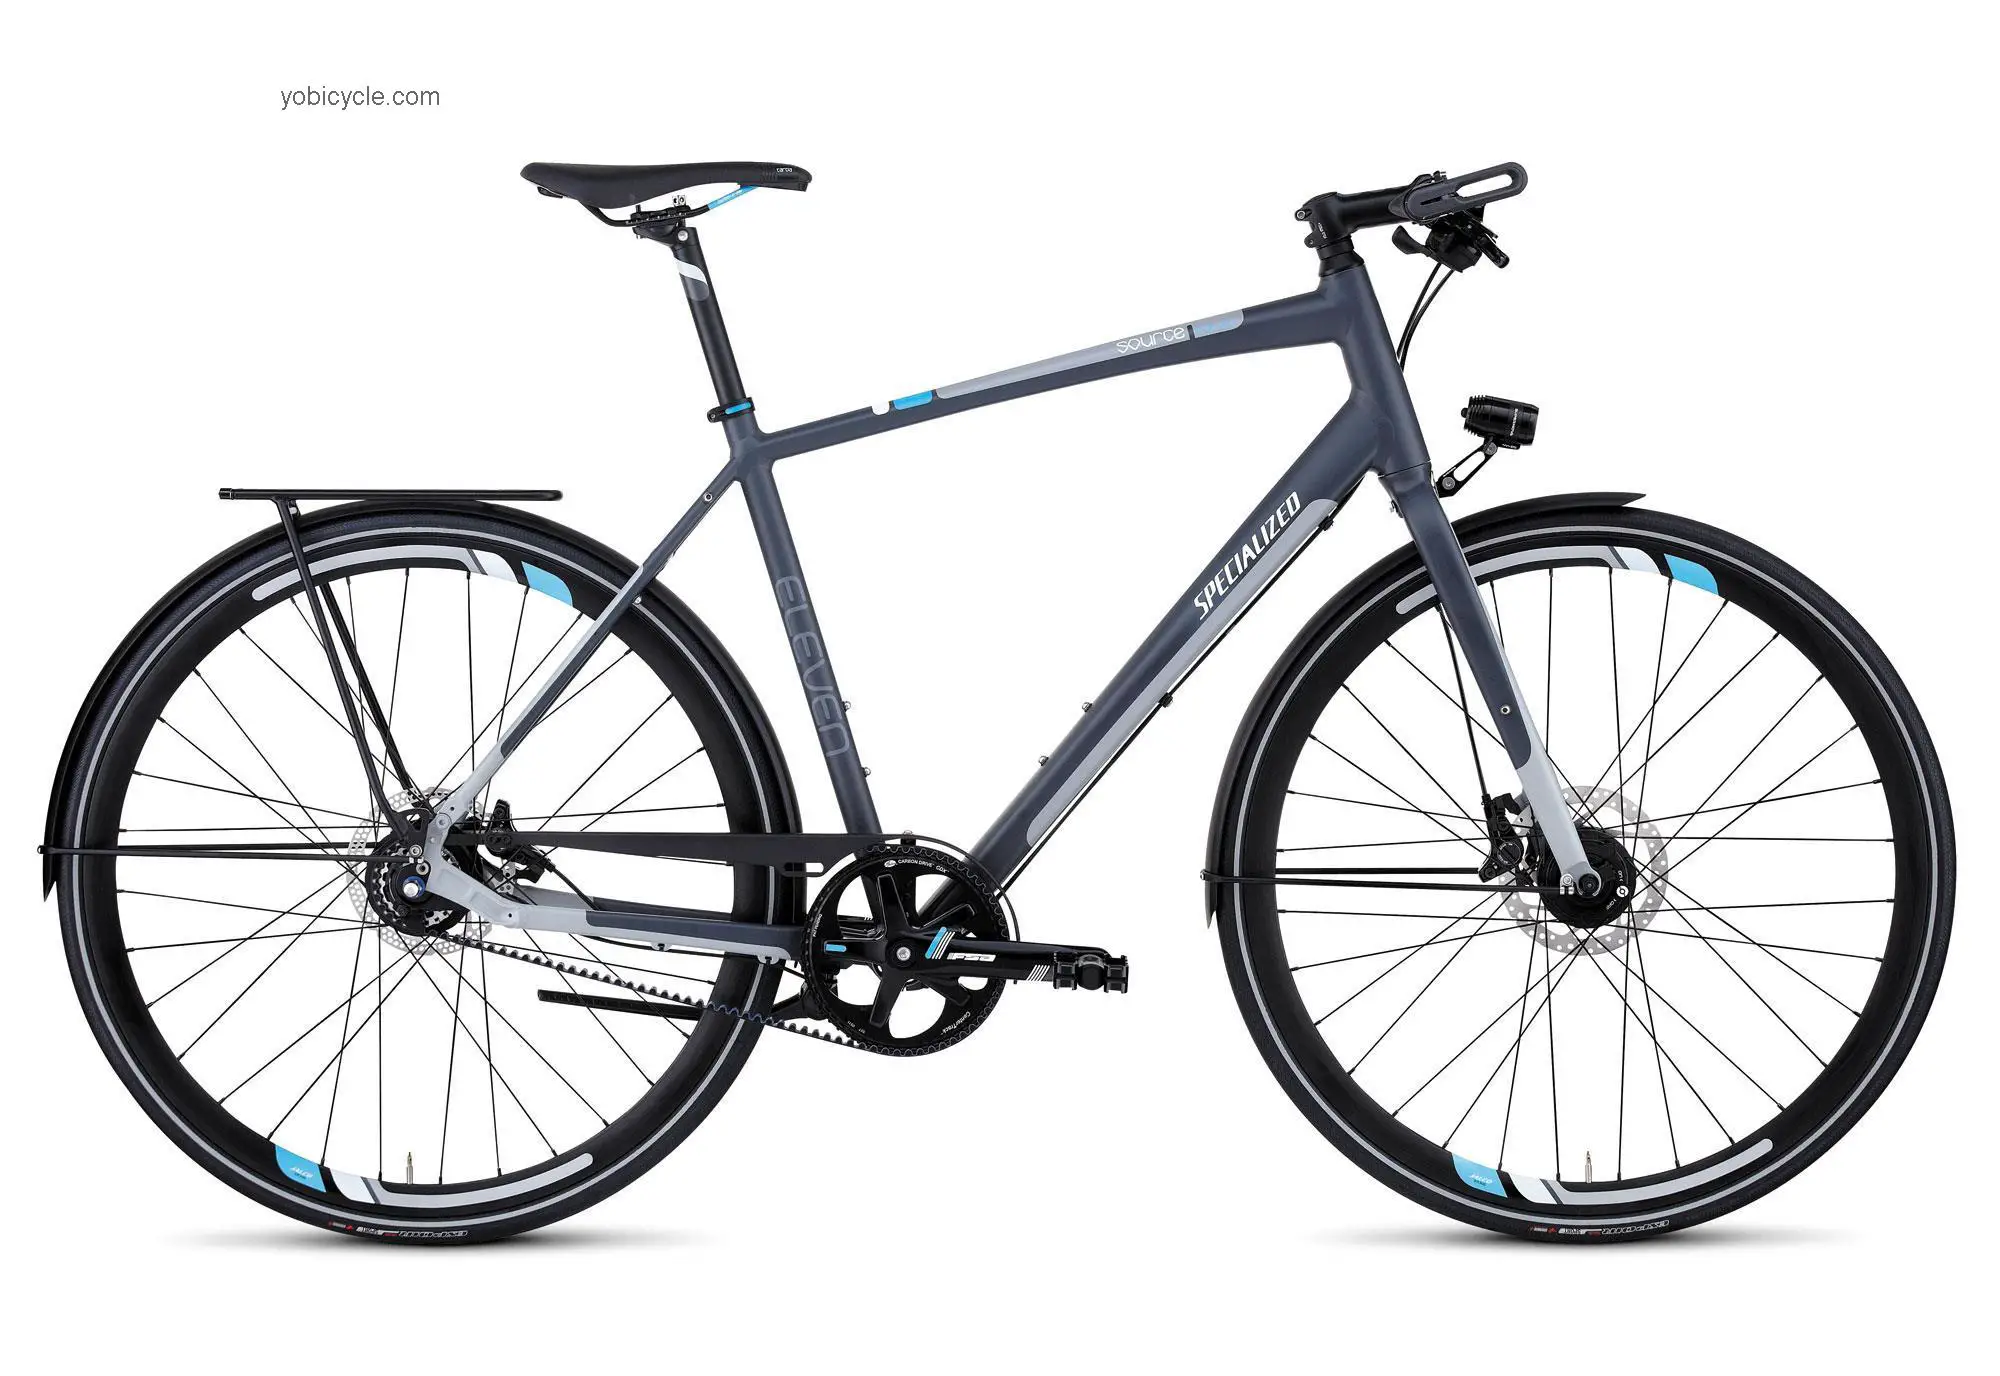 Specialized Source Eleven 2012 comparison online with competitors